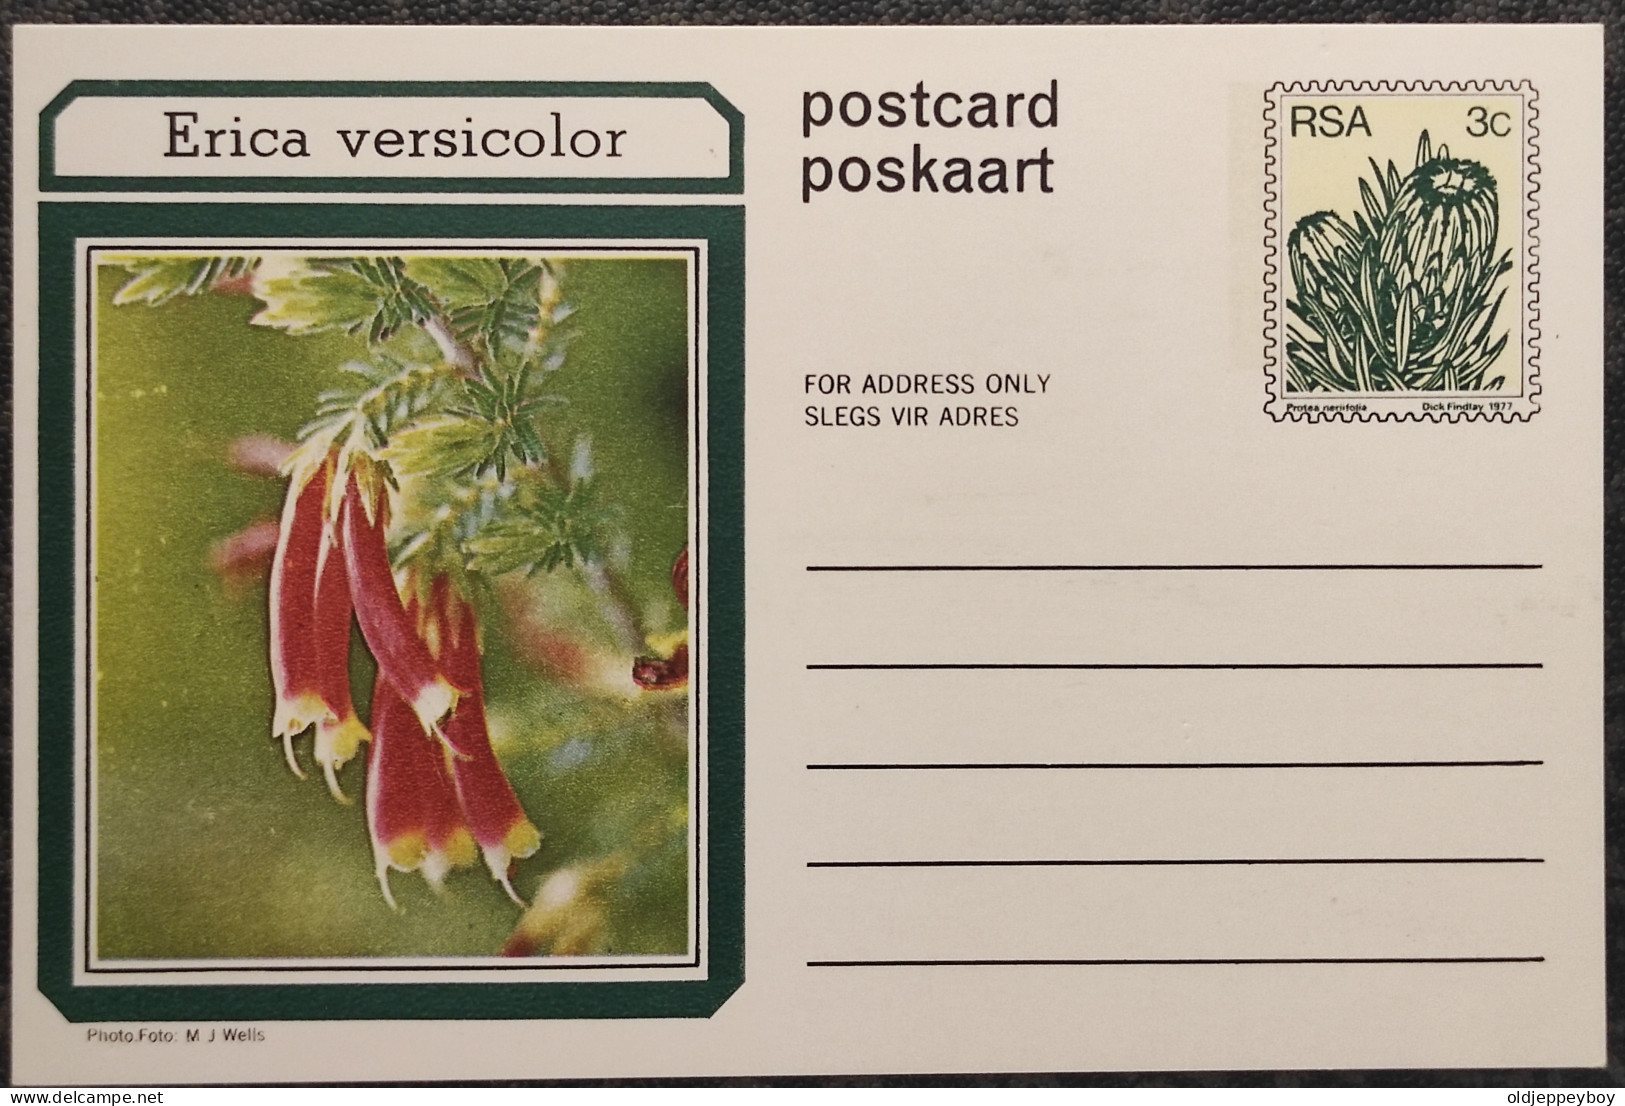 3c SOUTH AFRICA Postal STATIONERY CARD Illus ERICA VERSICOLOR FLOWER Cover Stamps Flowers Rsa - Lettres & Documents